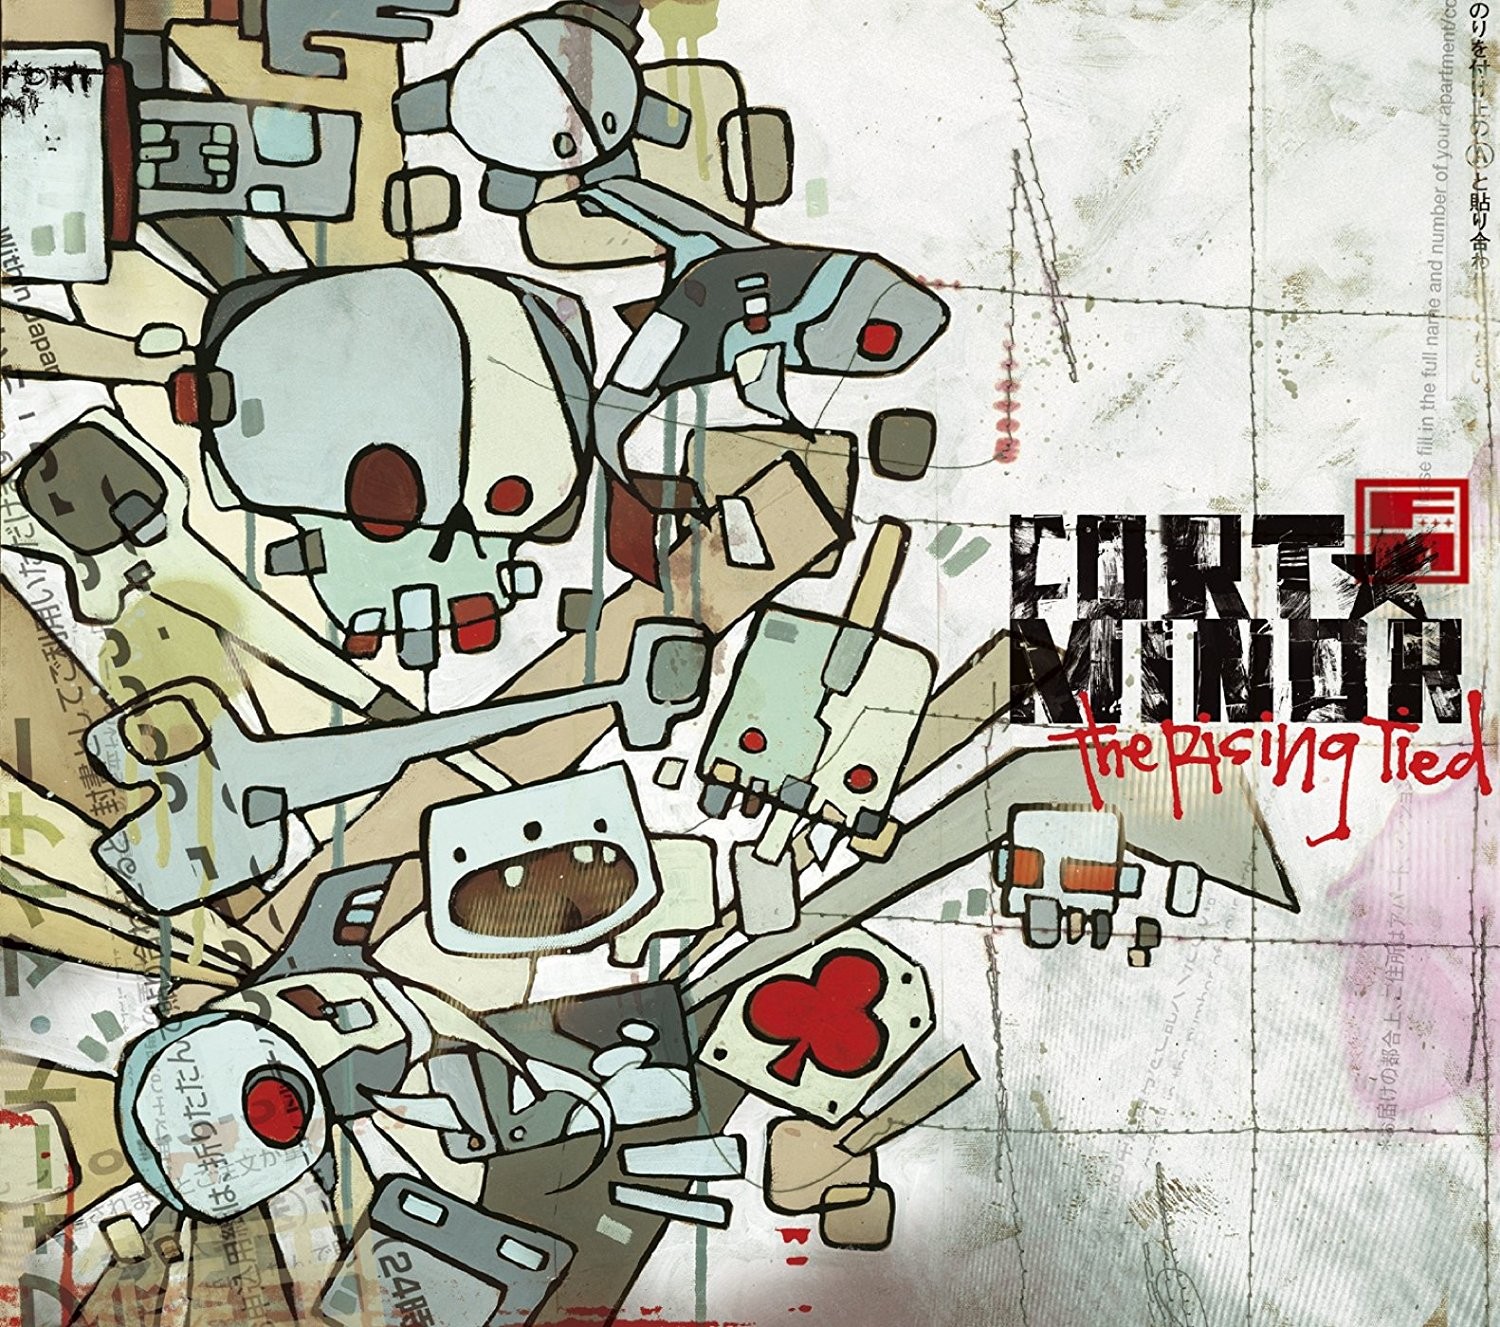 Fort Minor - The Rising Tied 2XLP